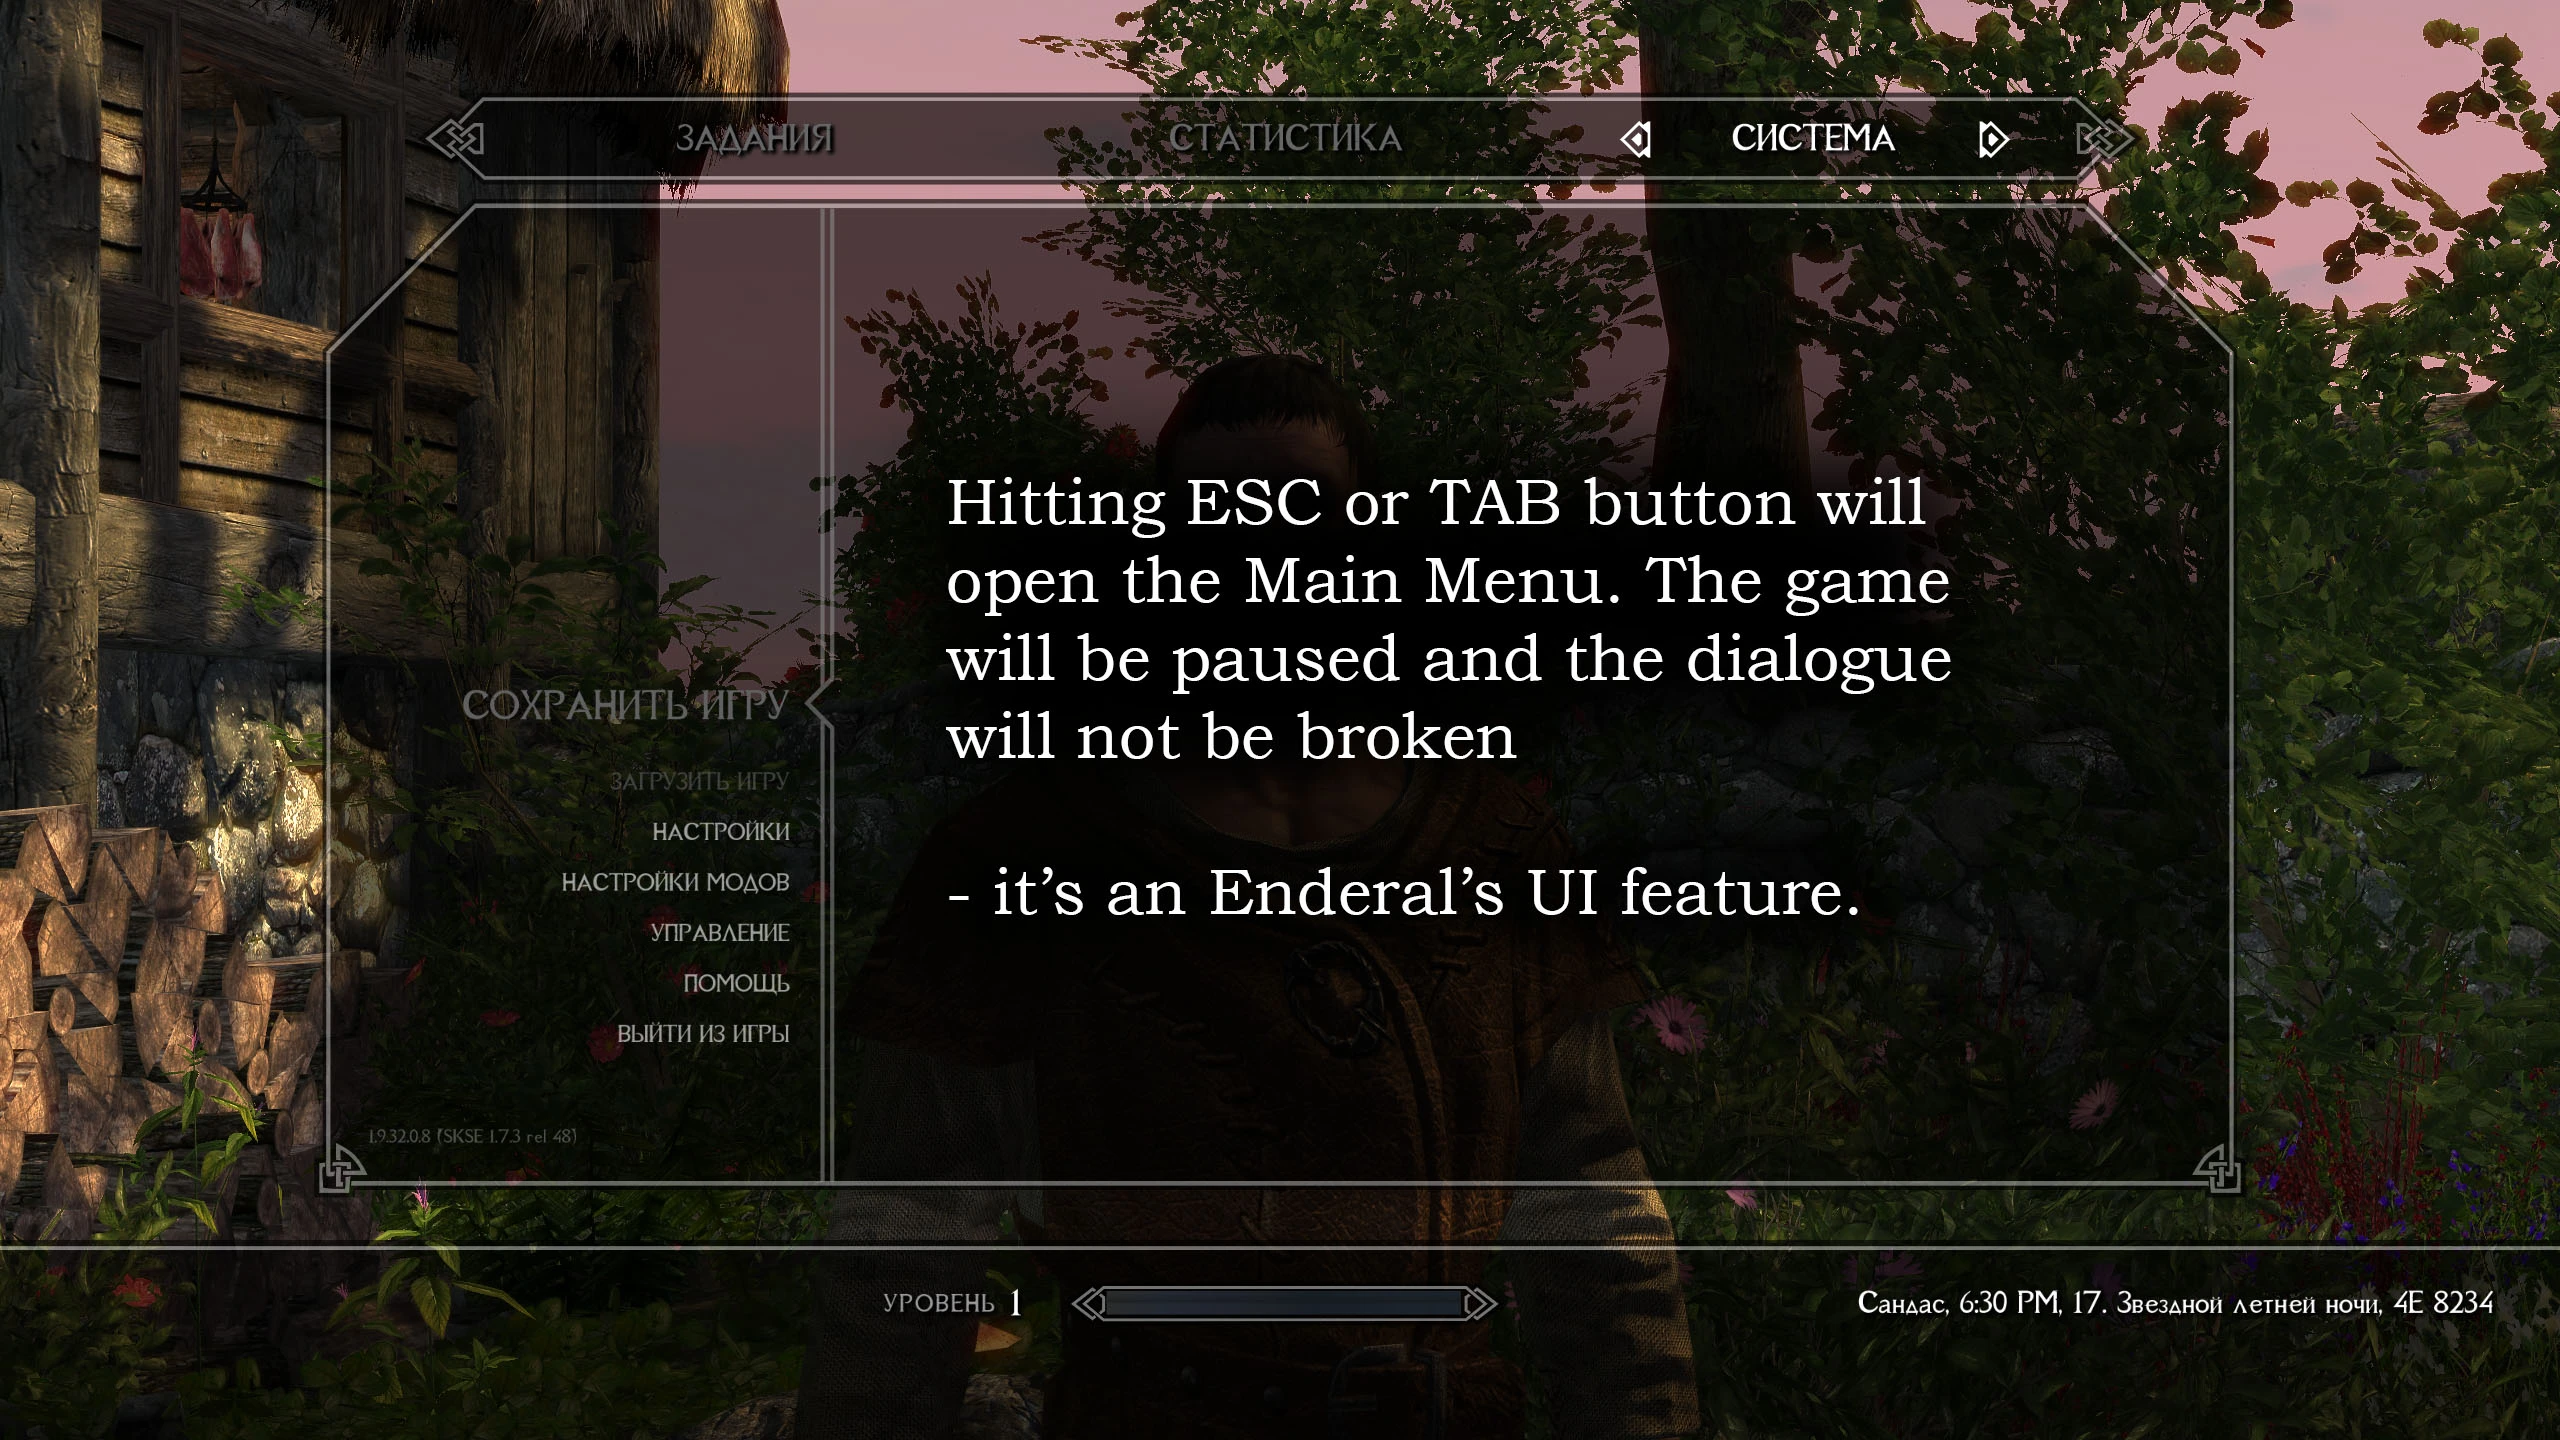 enderal download instructions